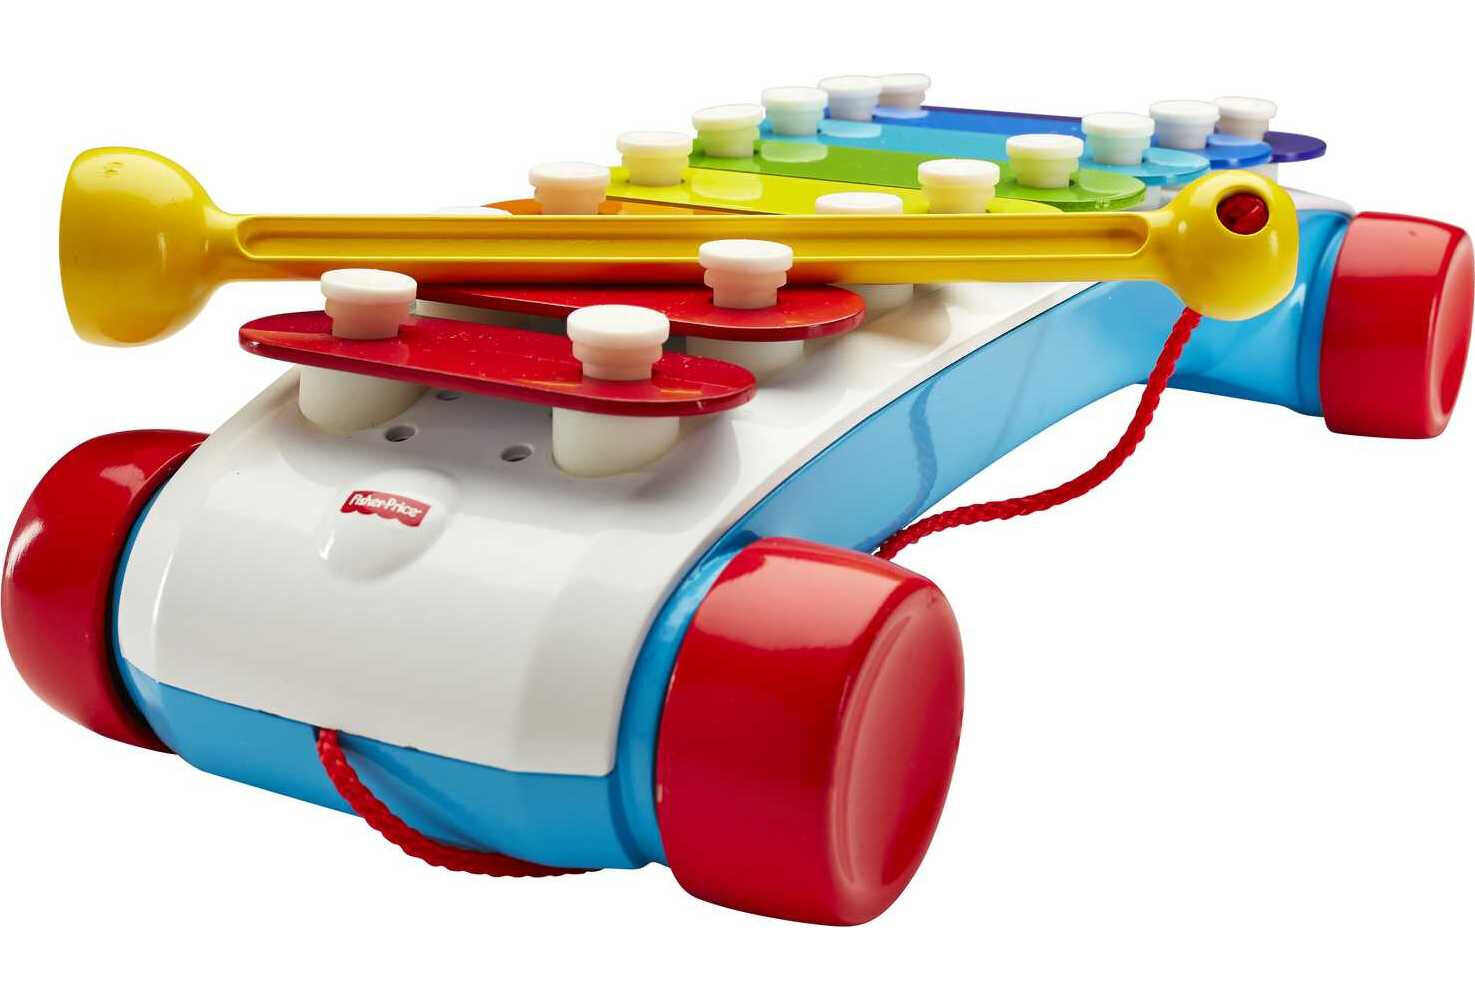 Fisher-Price Classic Xylophone Toddler Pretend Musical Instrument Pull Toy - image 5 of 6